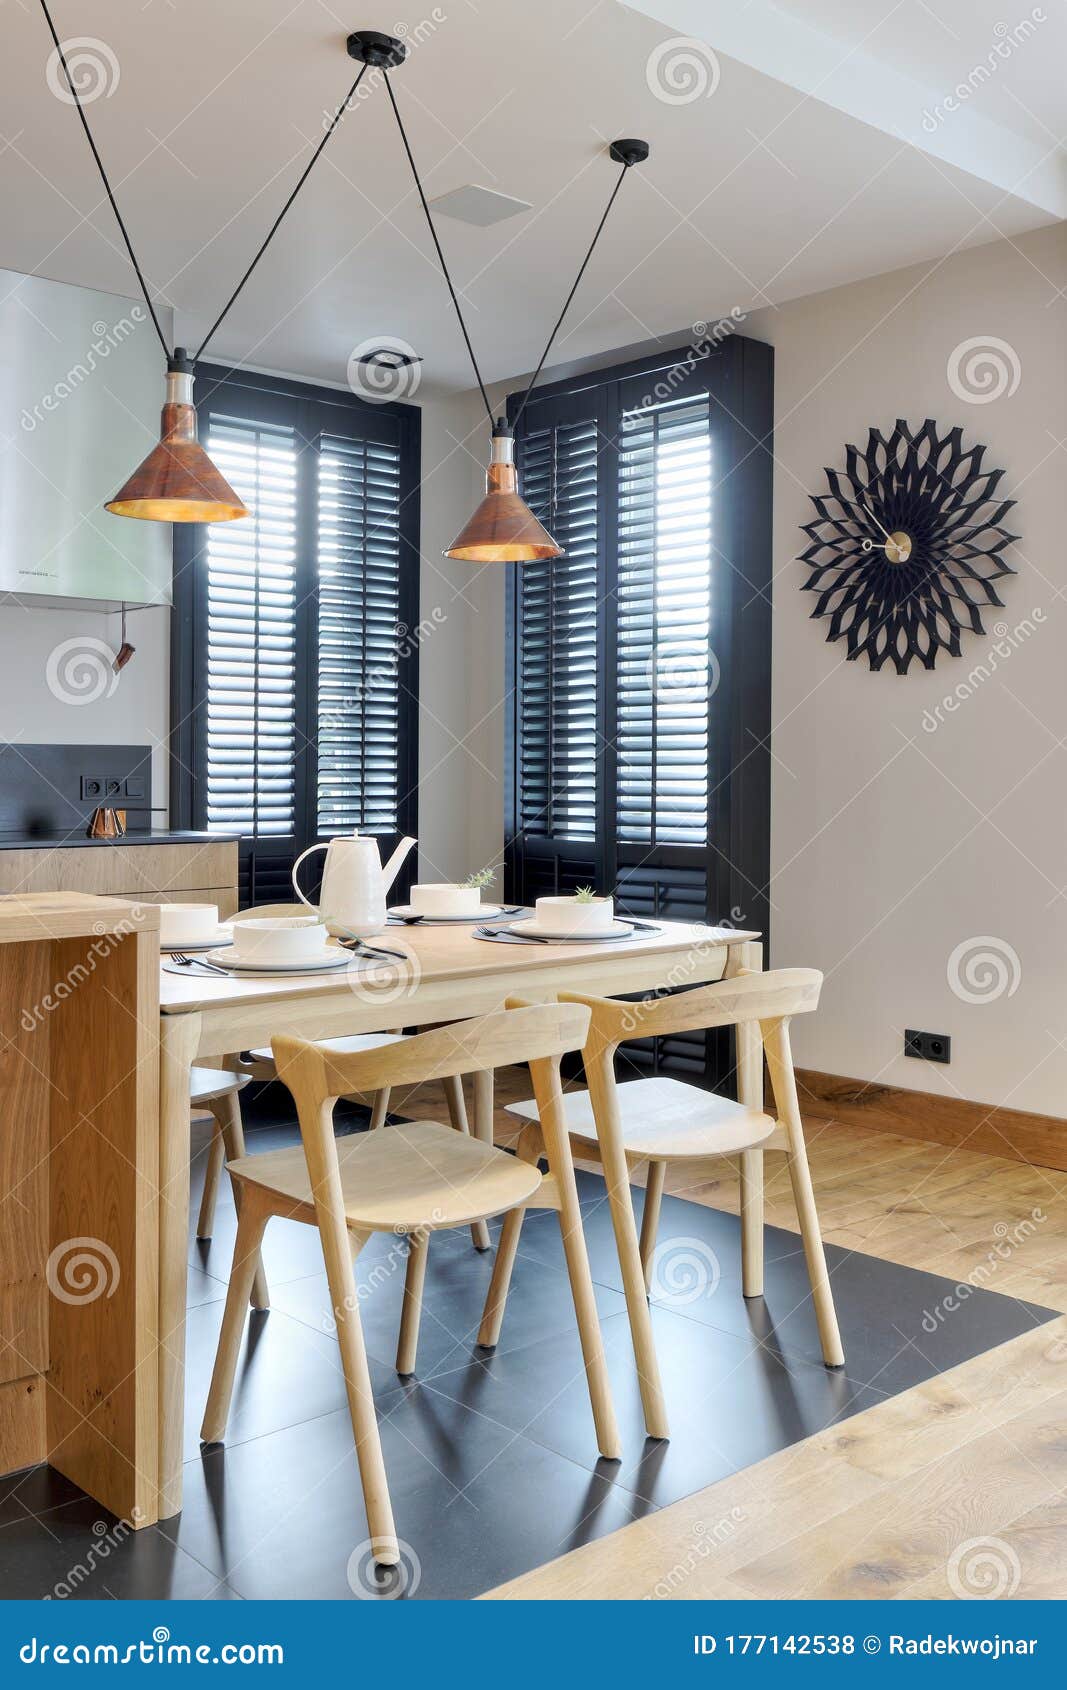 Kitchen Island With Wooden Dining Table Stock Photo Image Of Copper